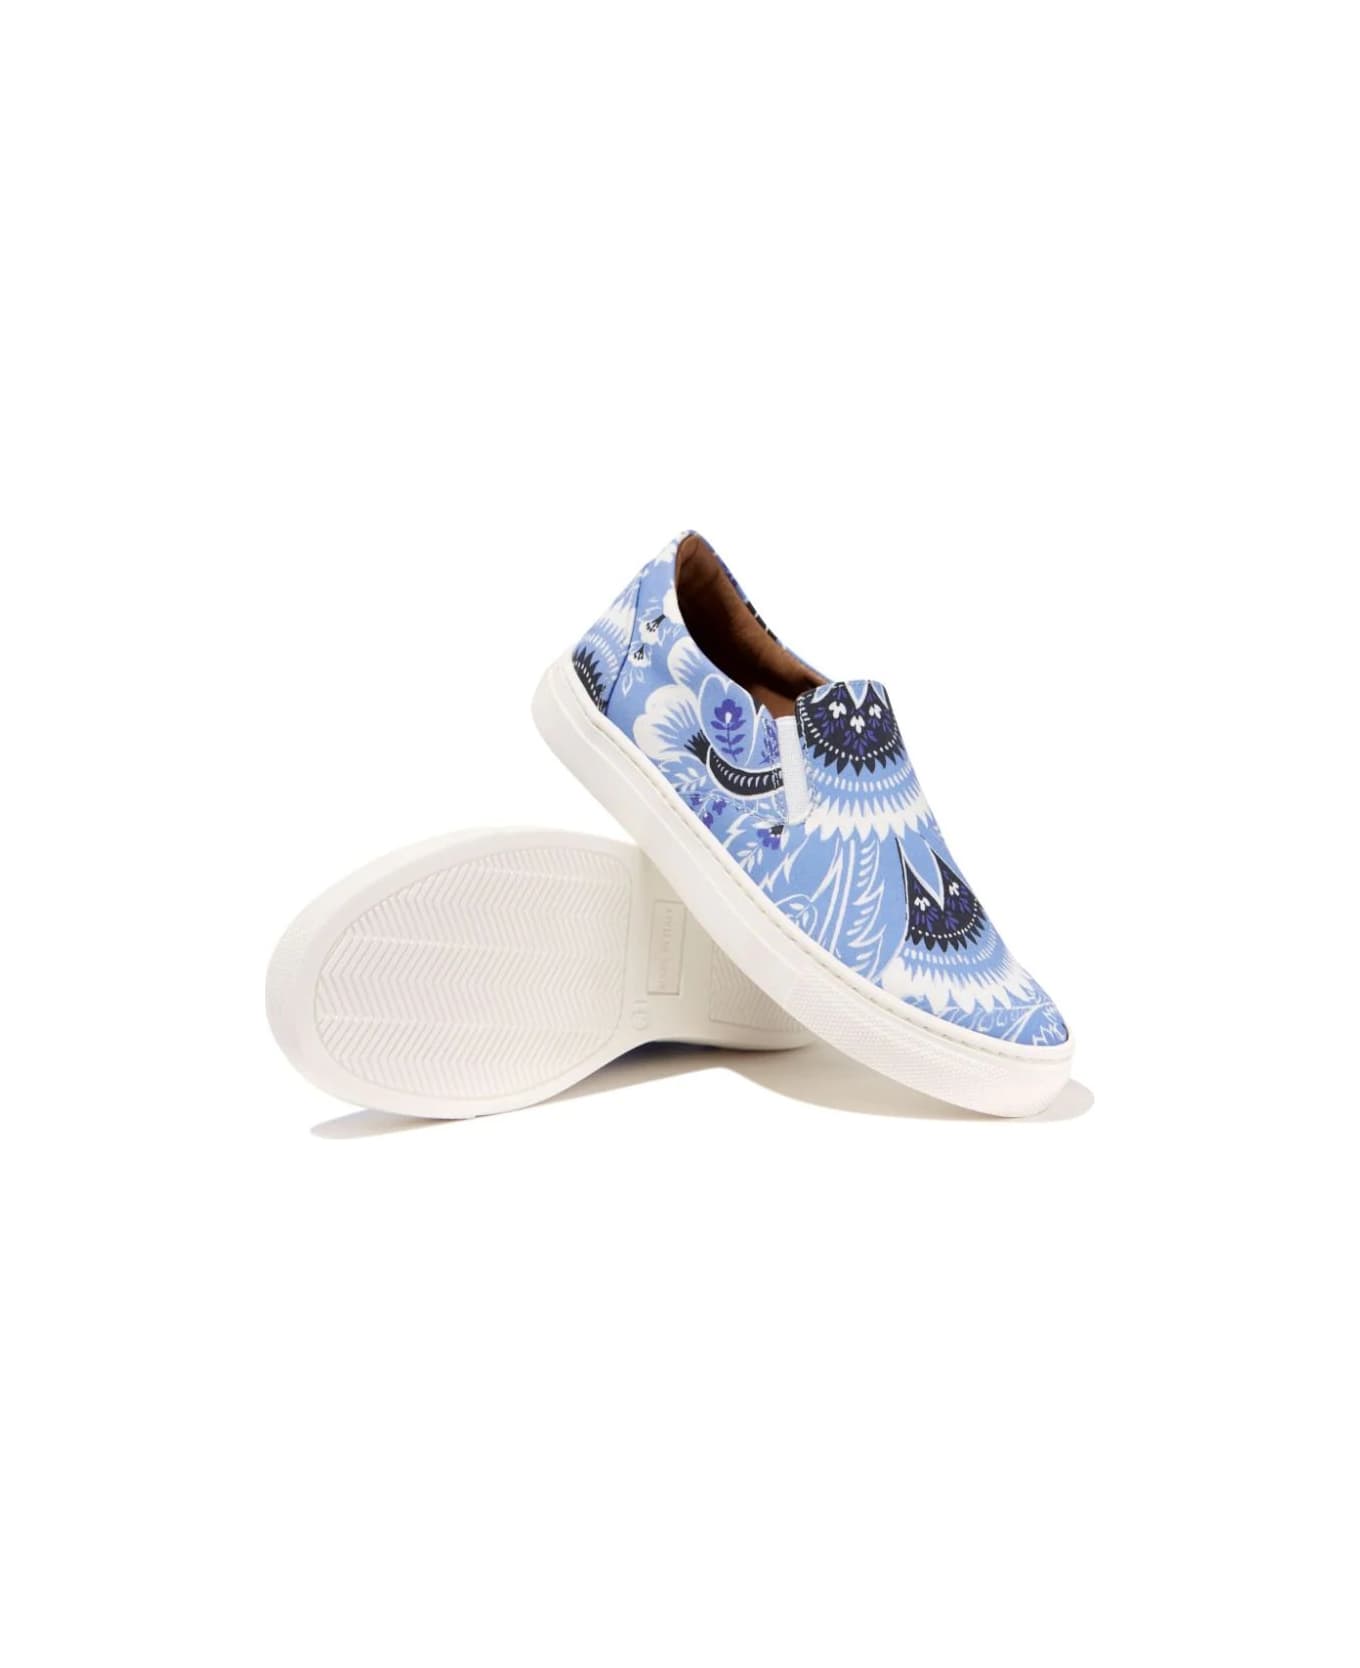 Etro Sneakers With Light Blue Paisley Print - Blue